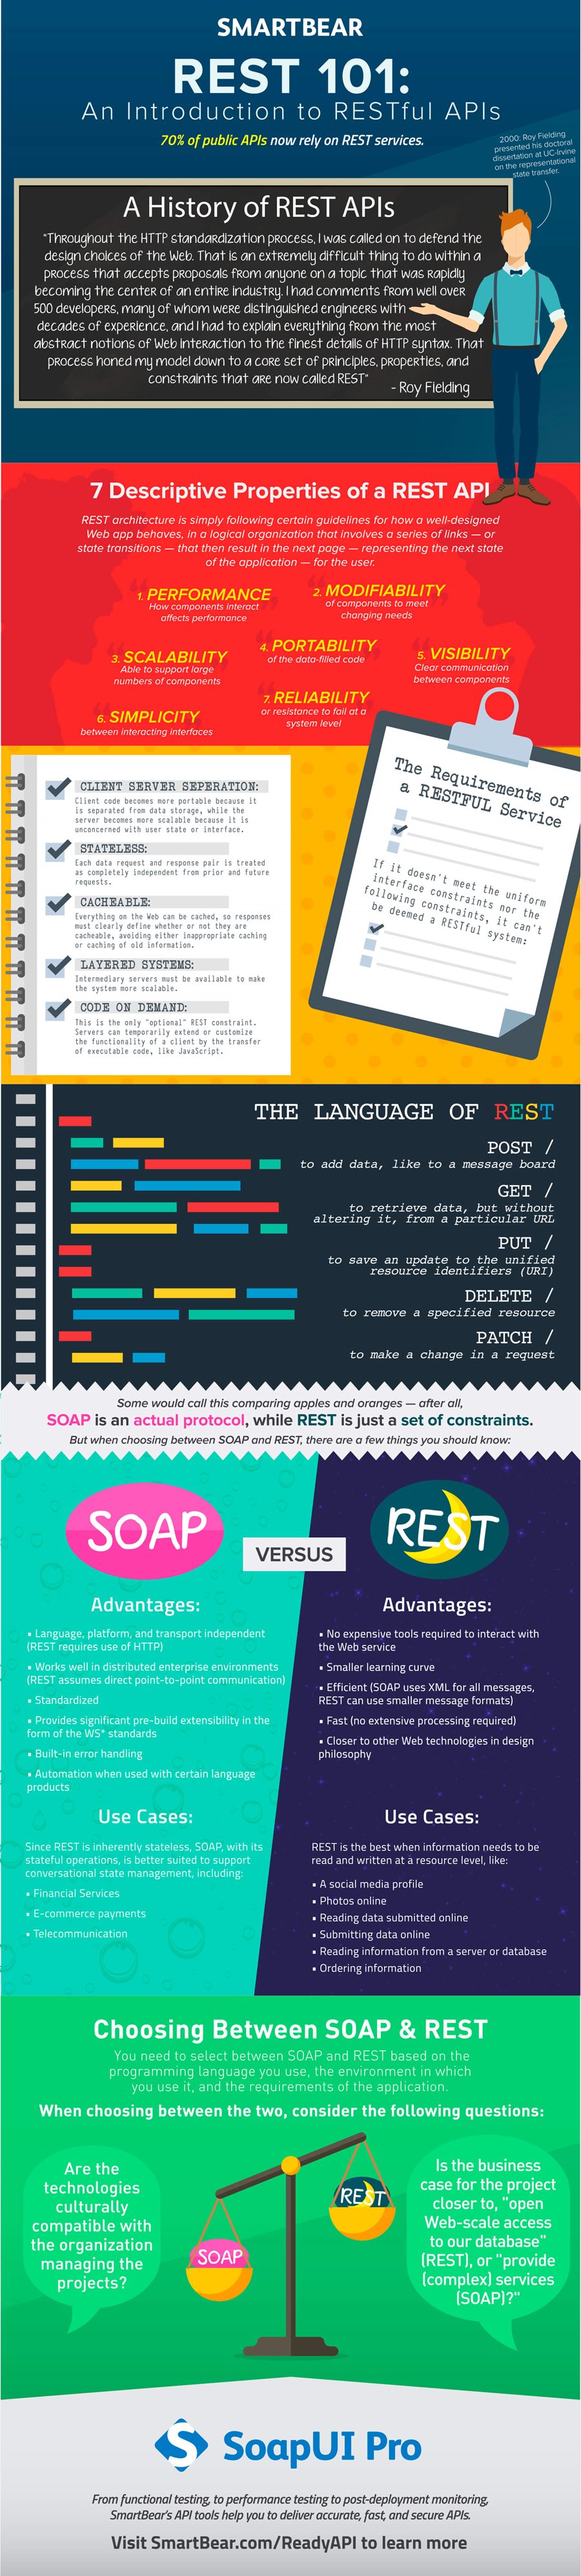 SoapUI-Pro_REST_infographic-(1).jpg